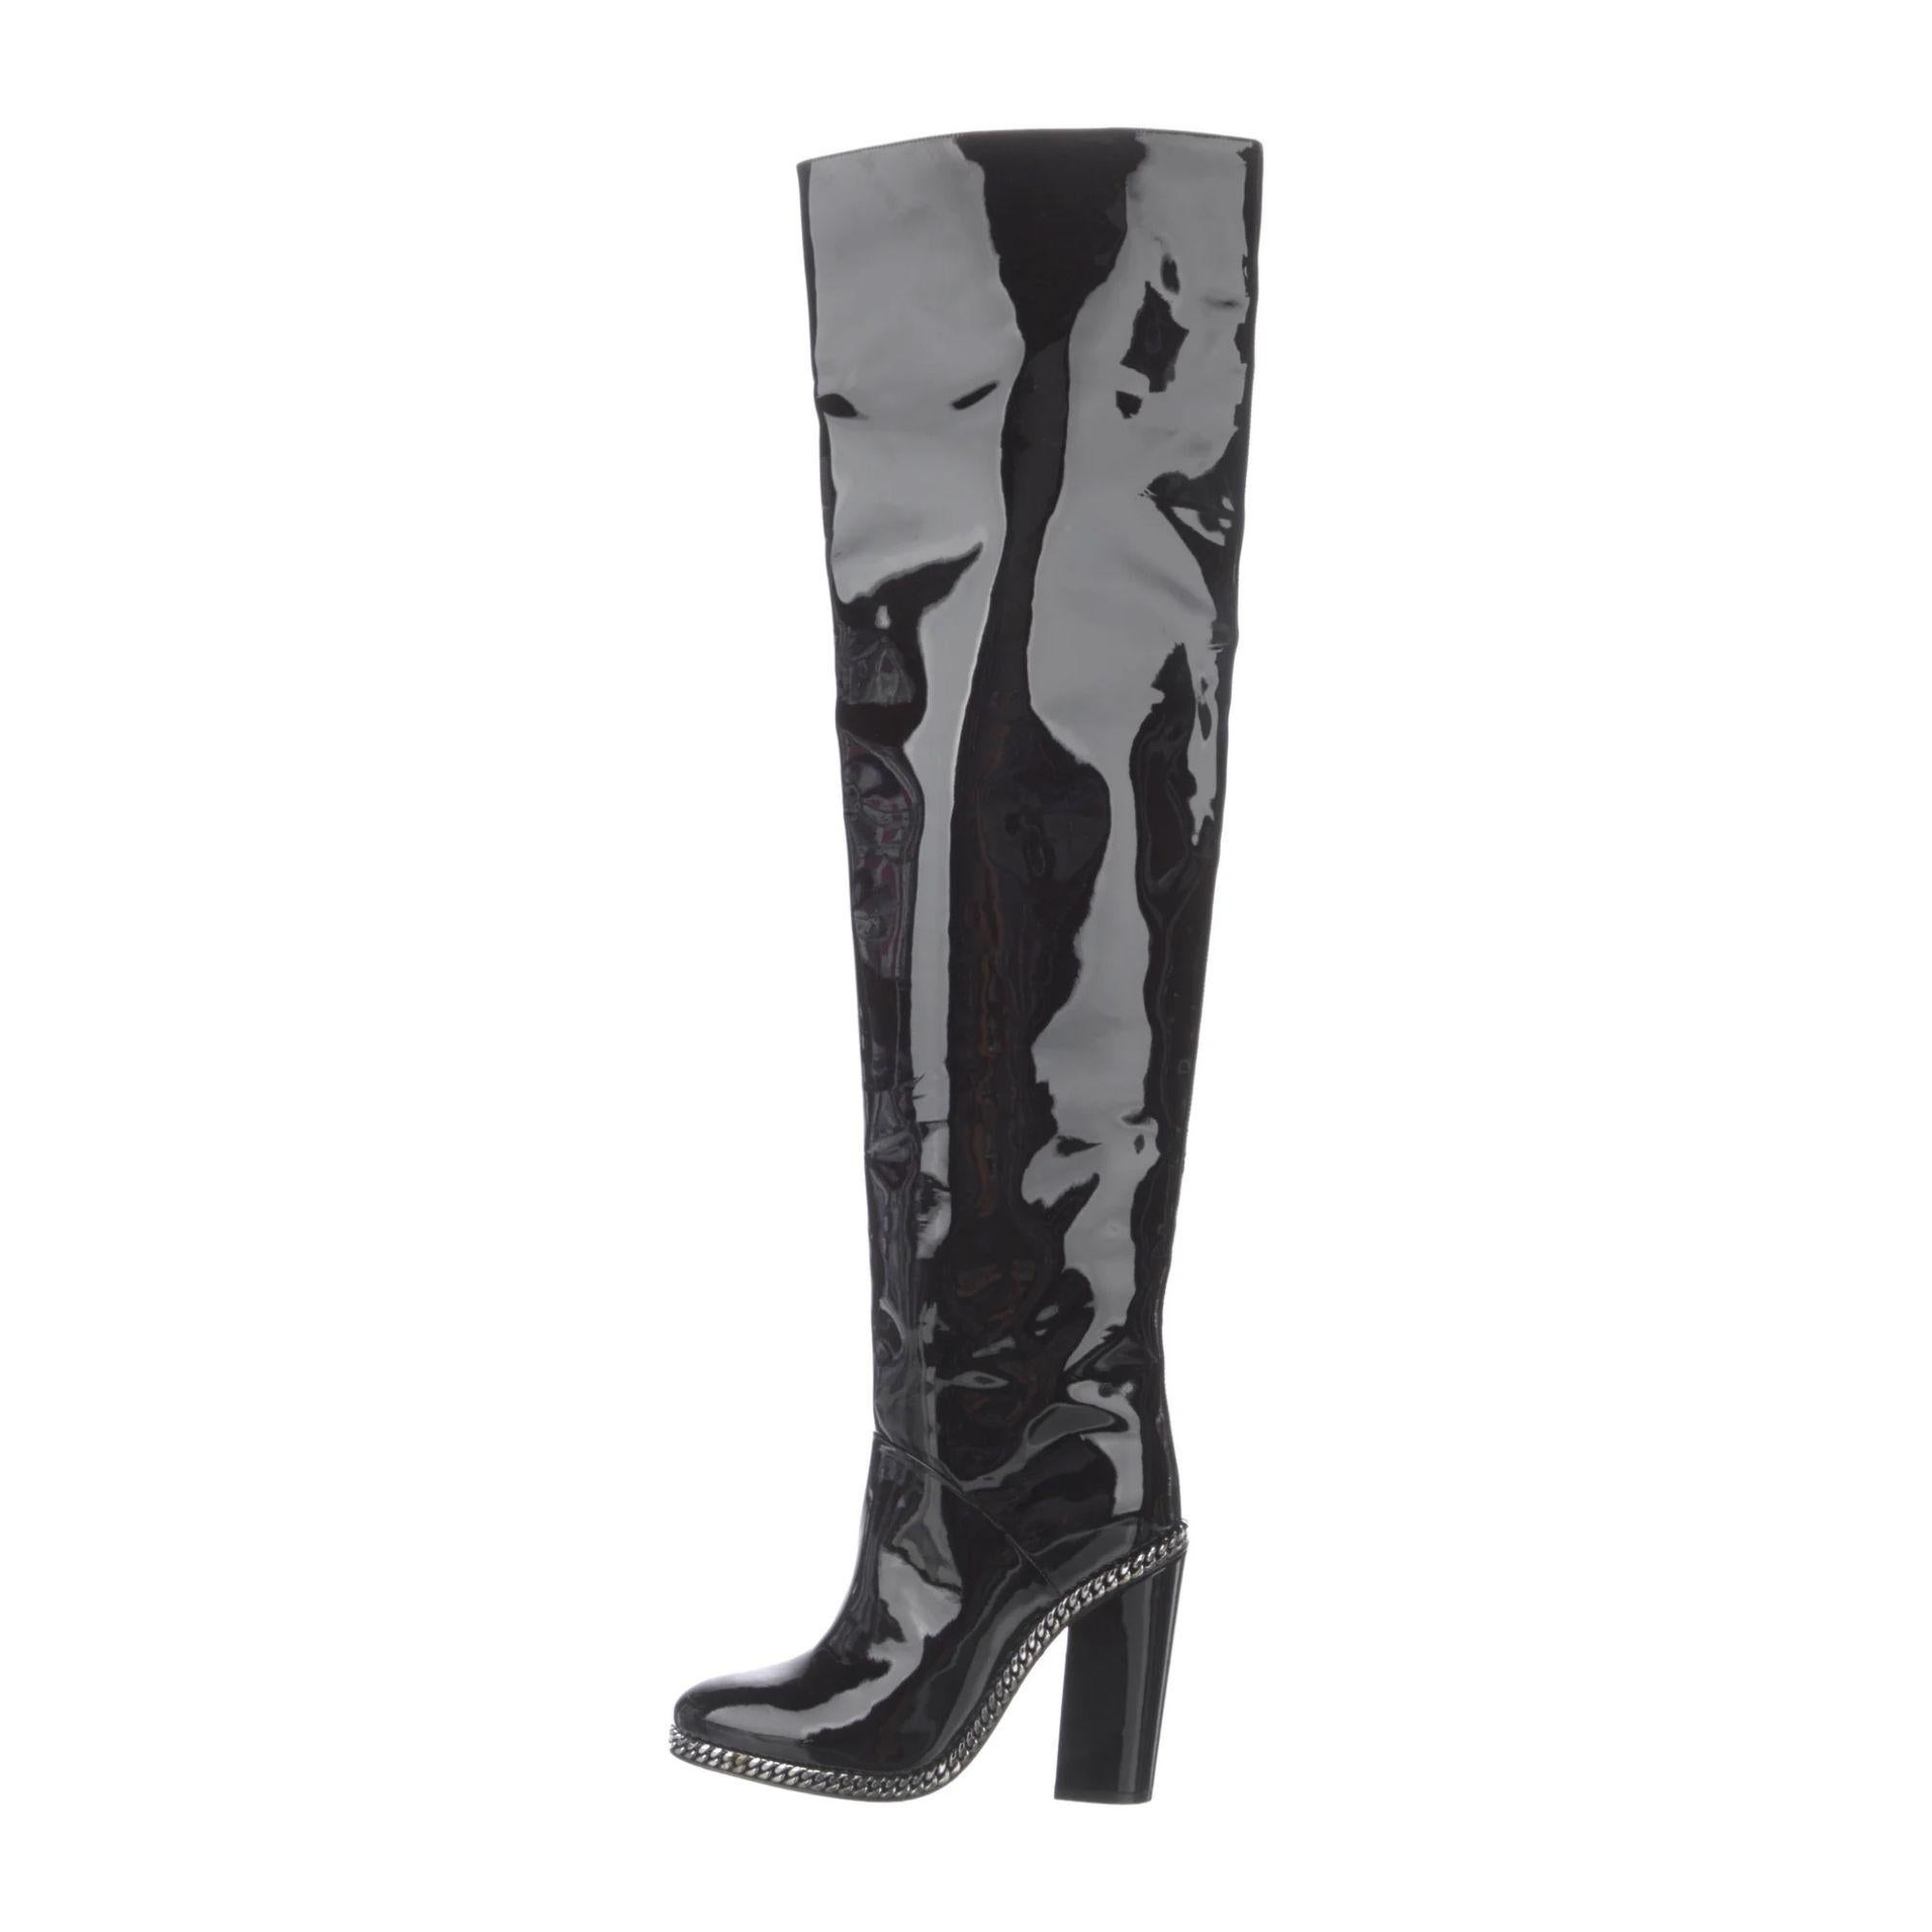 Emma Patent Leather Emma Over-The-Knee Boots (38.5 EU) For Sale